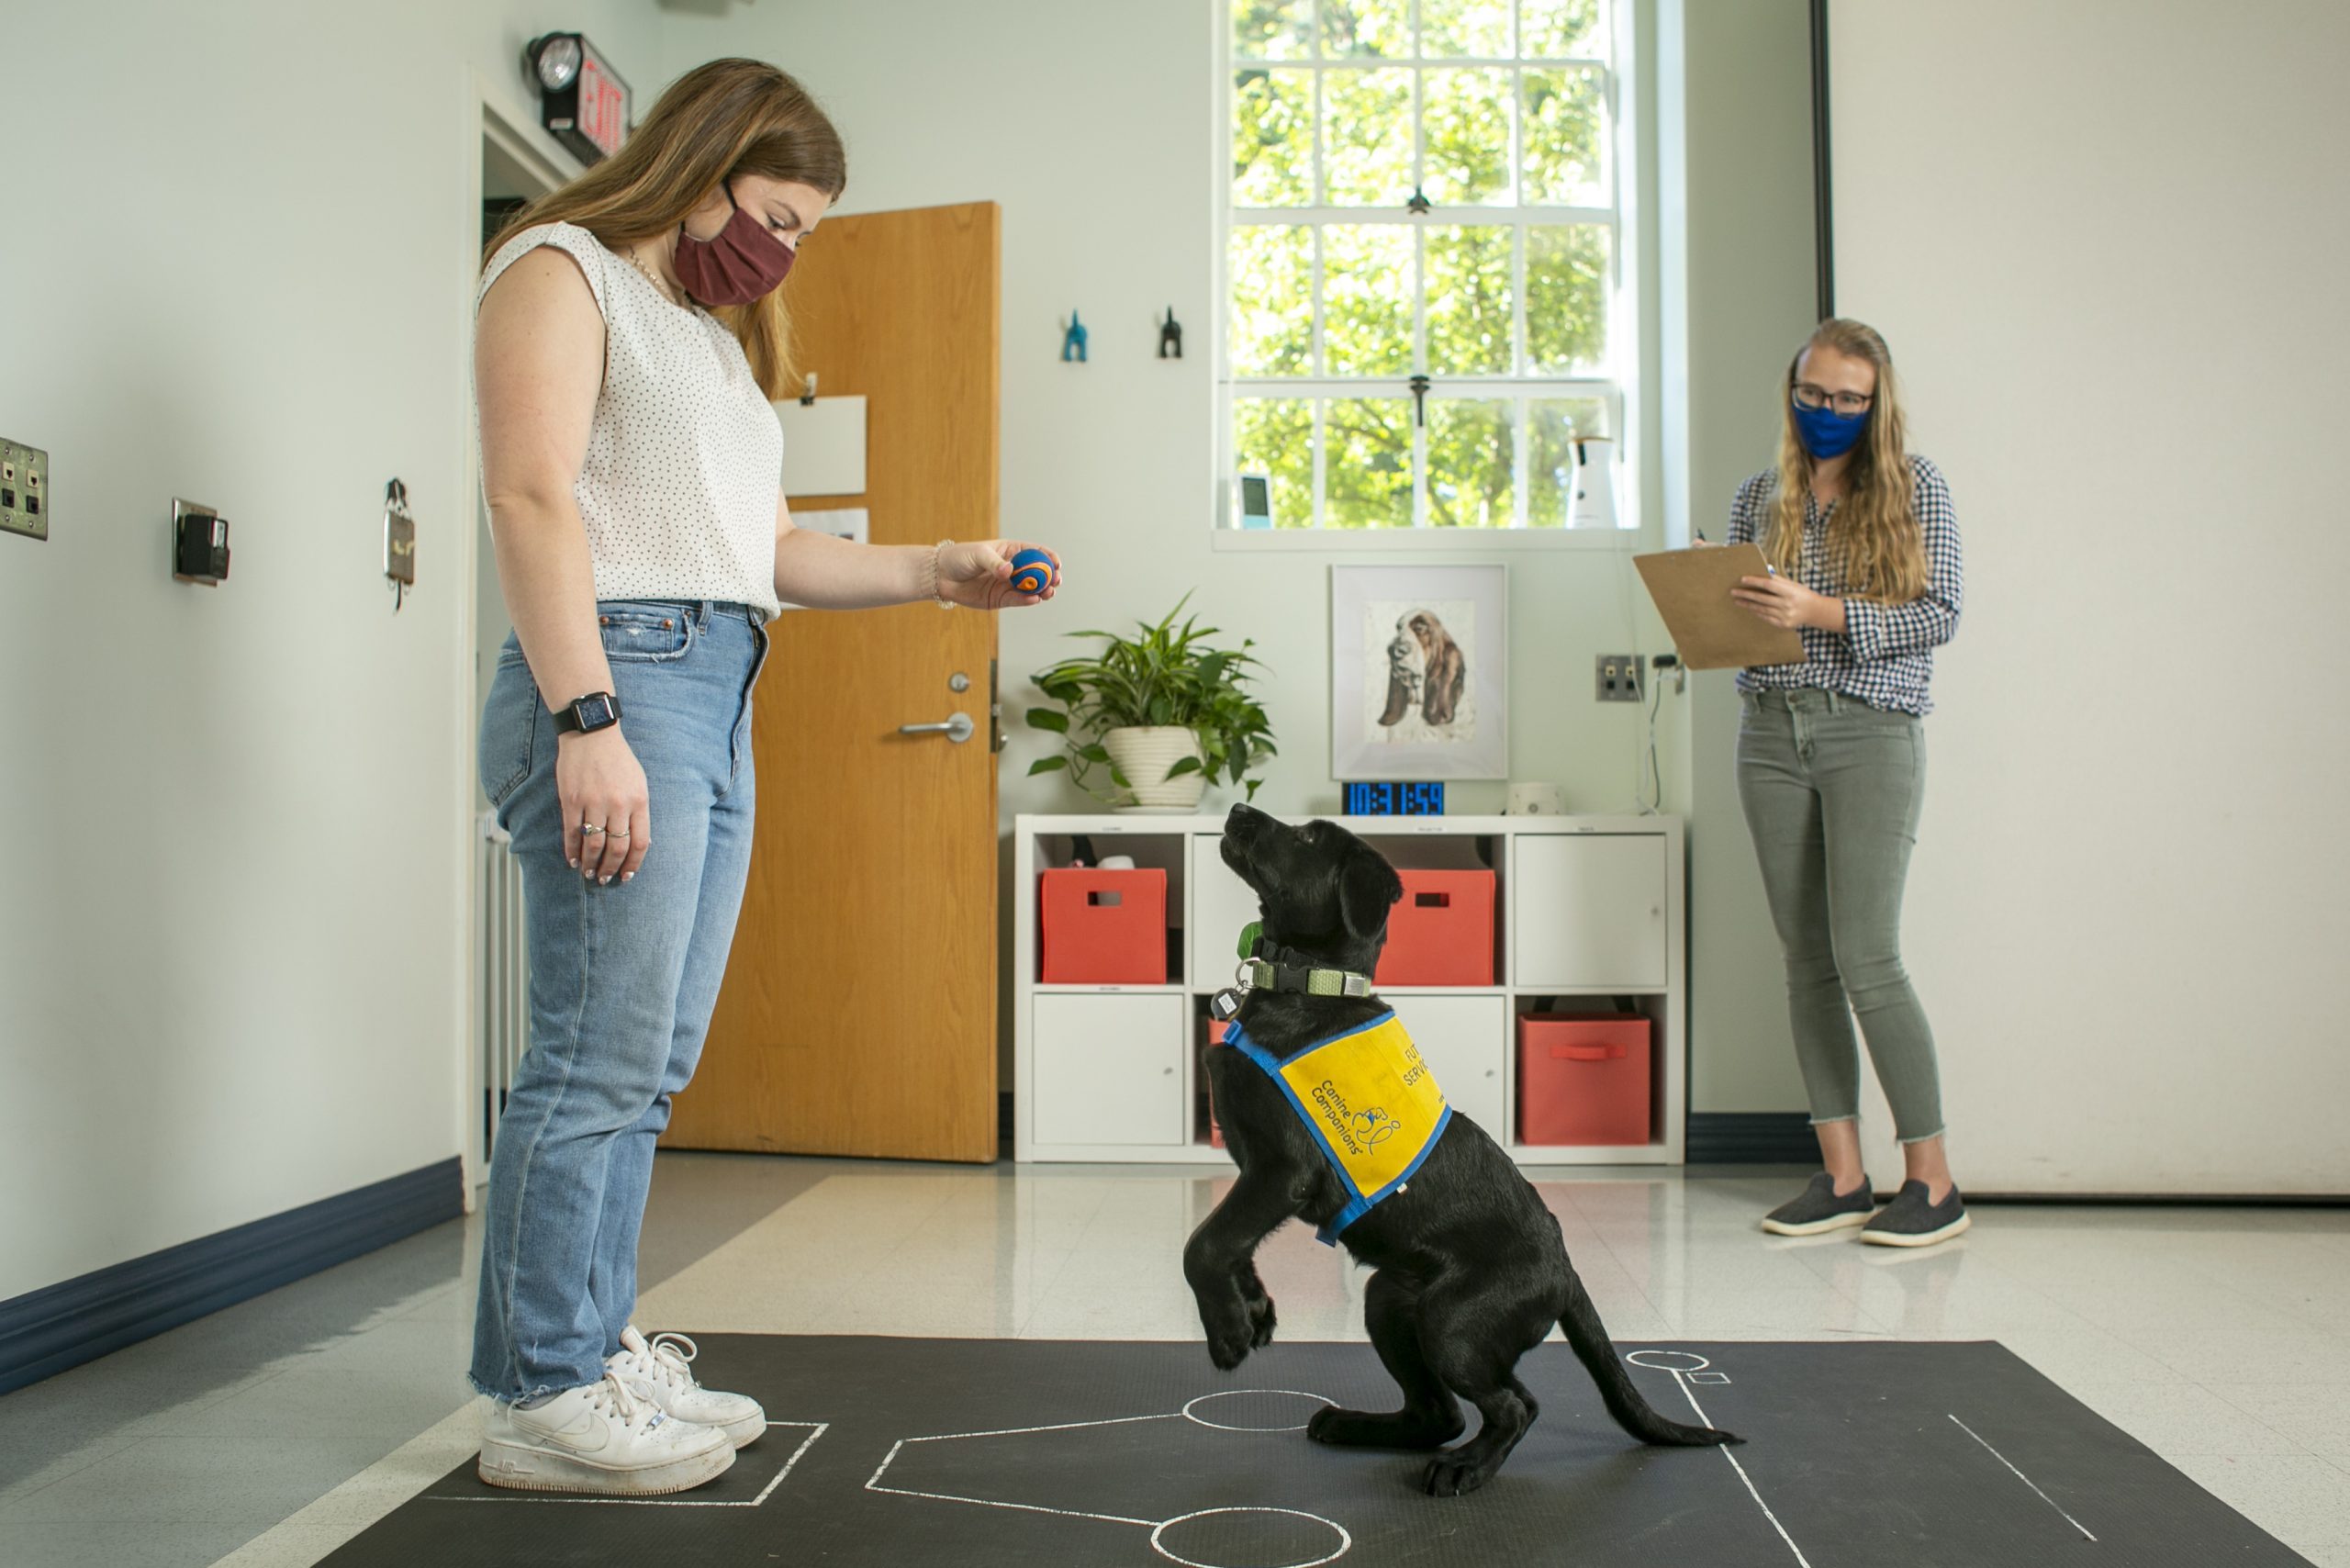 Doctoral students Hannah Salomons and  Morgan Ferrans conduct behavioral testing on sisters Gilda and Gloria in the Duke Puppy Kindergarten. Ferrans and Salomons are also testing the puppies’ heart rates with a monitor, as well as their adrenaline through saliva testing.